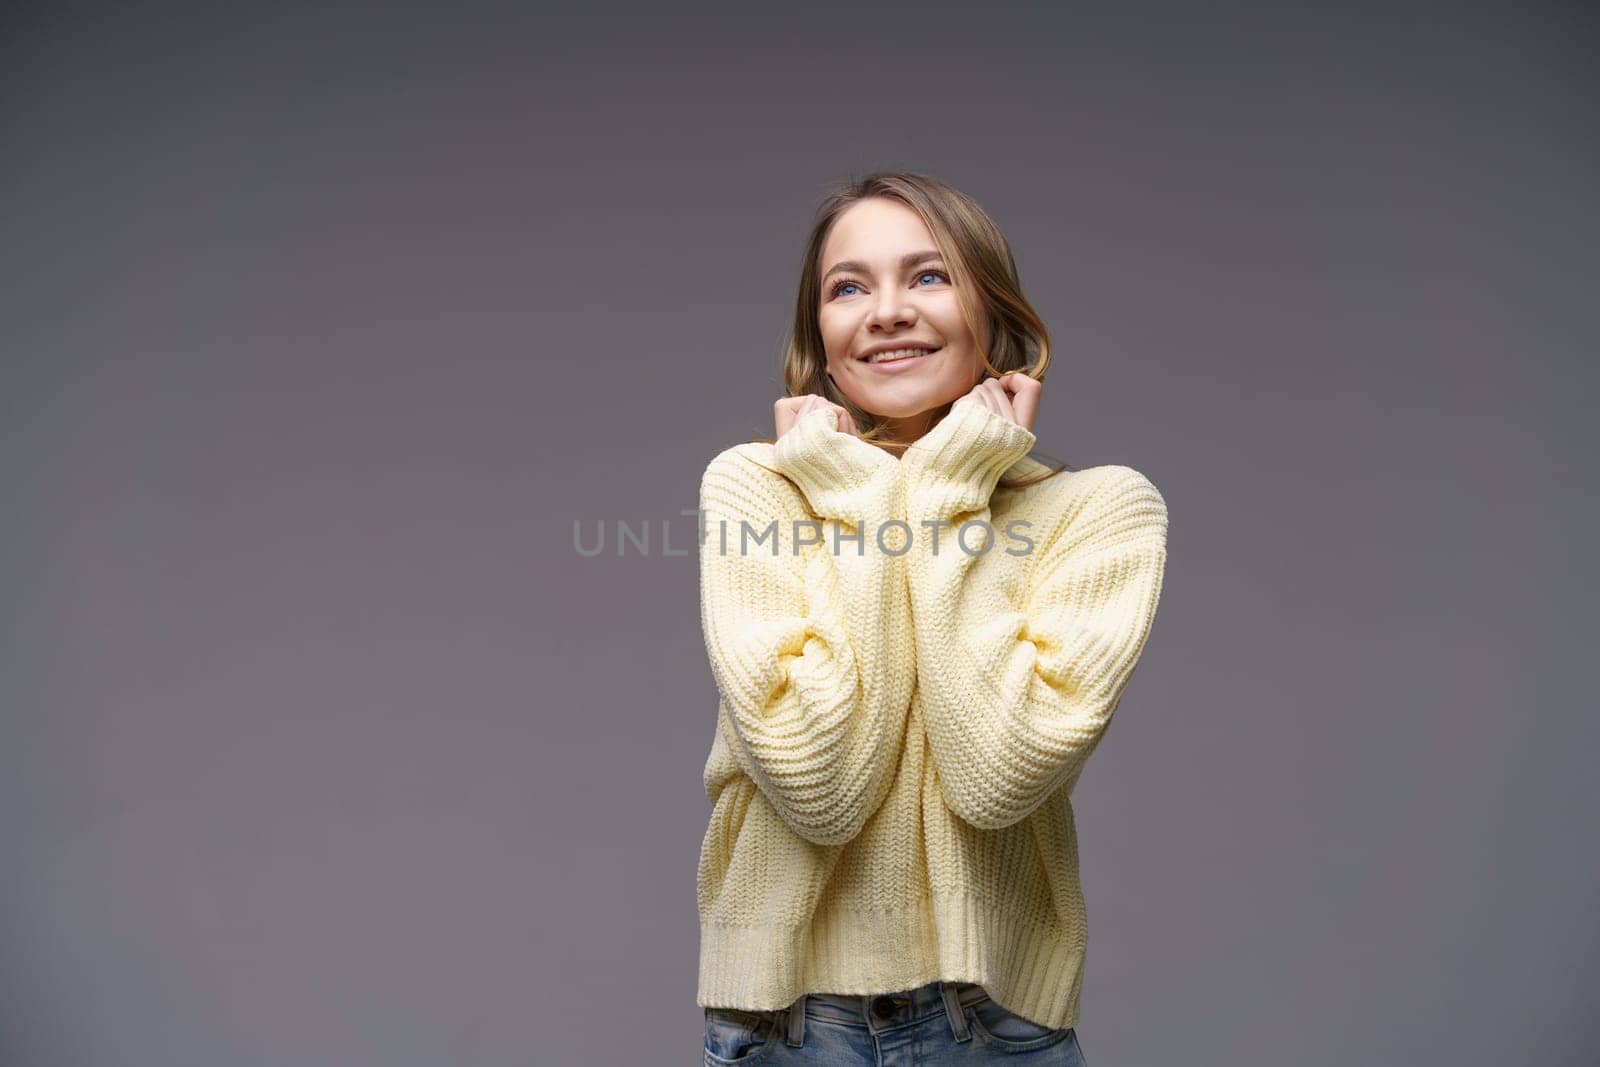 Portrait of a beautiful young girl of Caucasian ethnicity in a yellow sweater on a gray background cute smiling. Keeps his hands to his face.